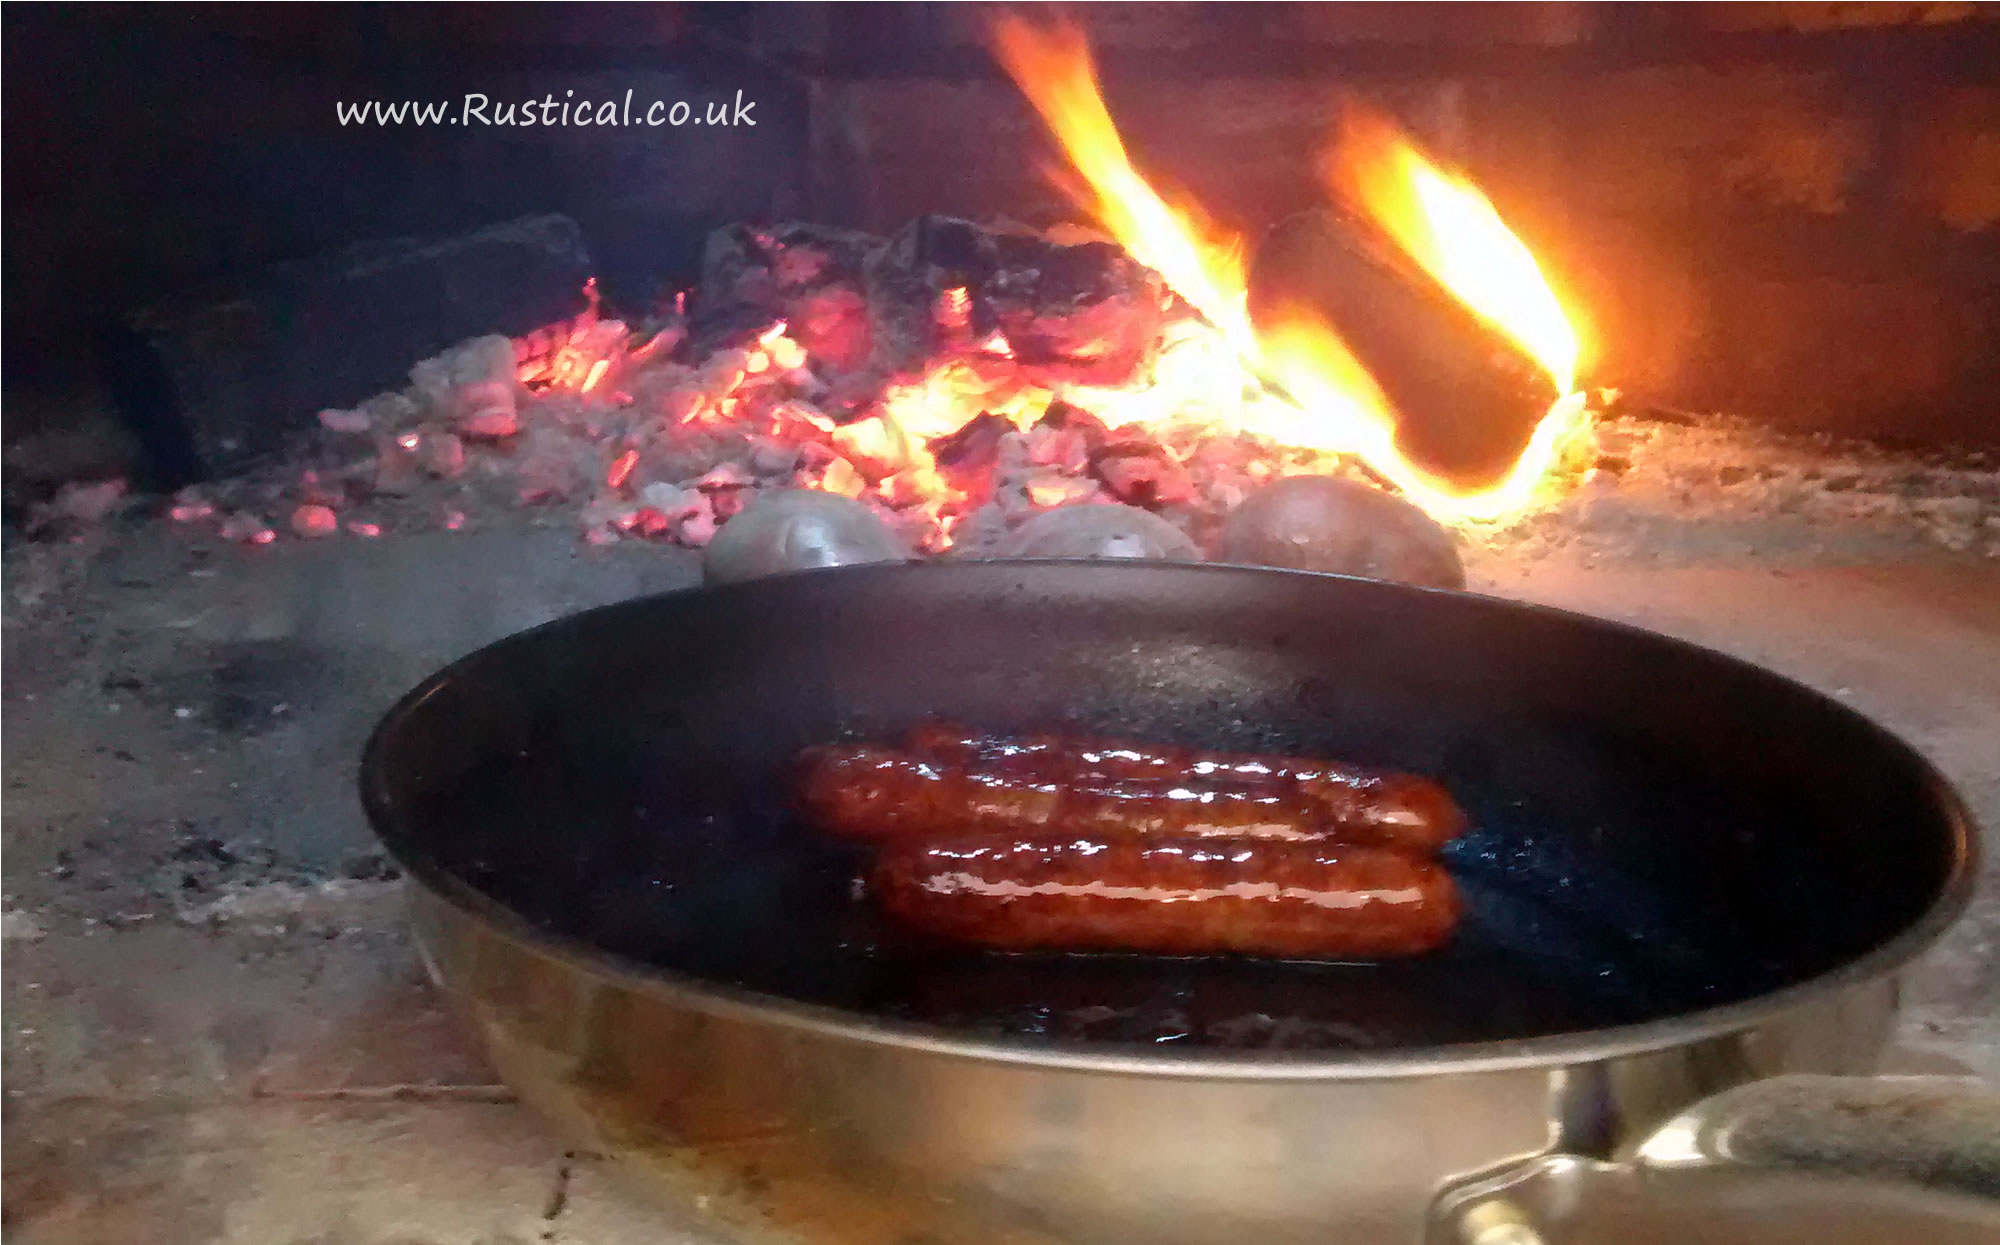 Cooking Sausages in a wood fired oven